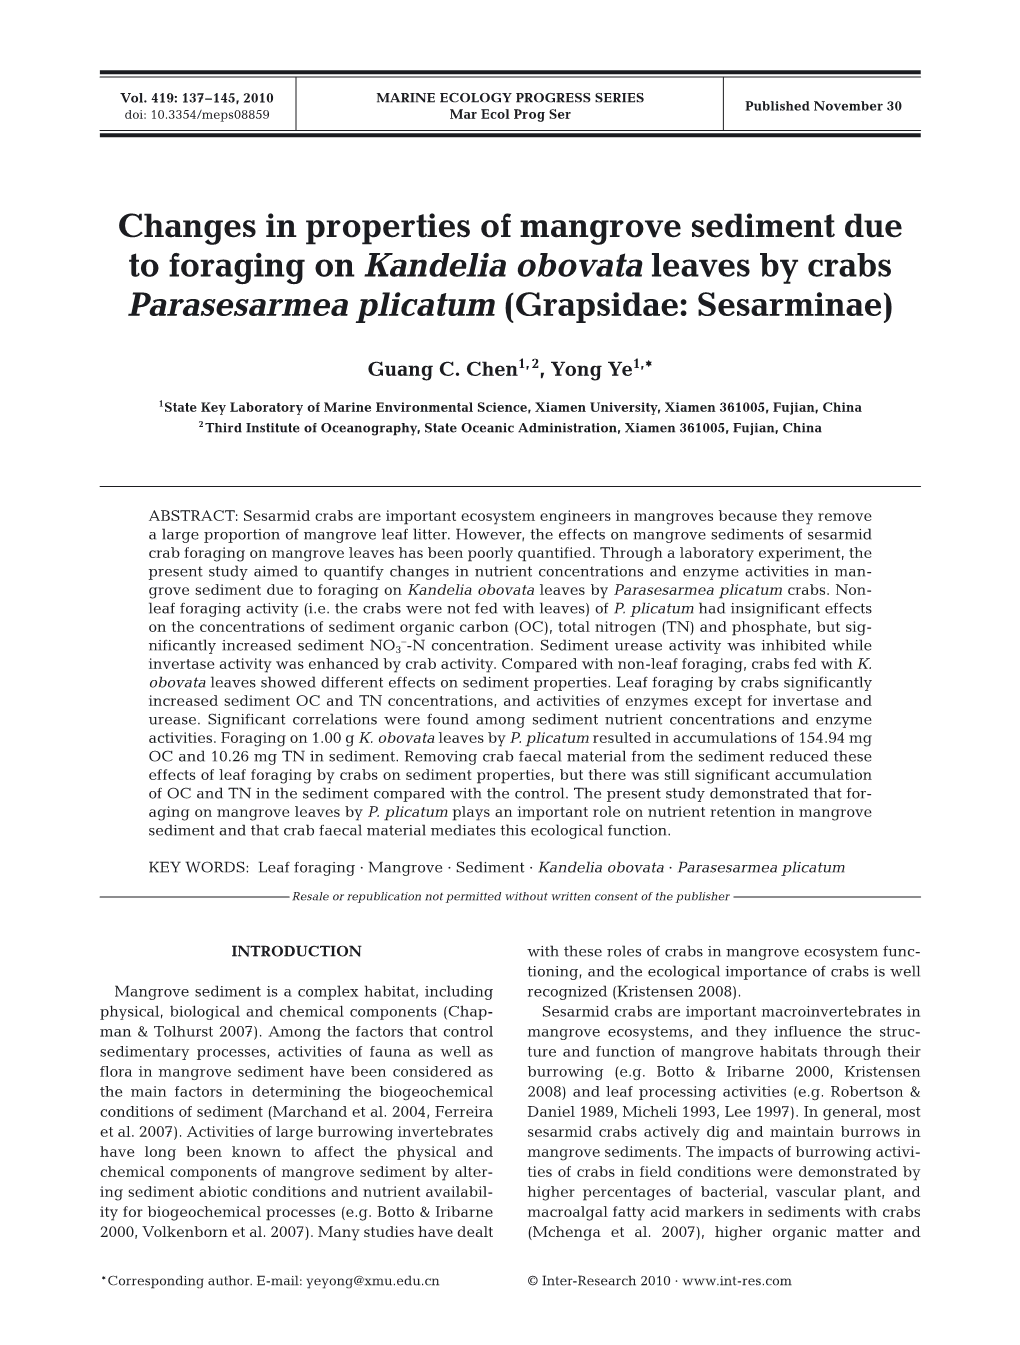 Changes in Properties of Mangrove Sediment Due to Foraging on Kandelia Obovata Leaves by Crabs Parasesarmea Plicatum (Grapsidae: Sesarminae)